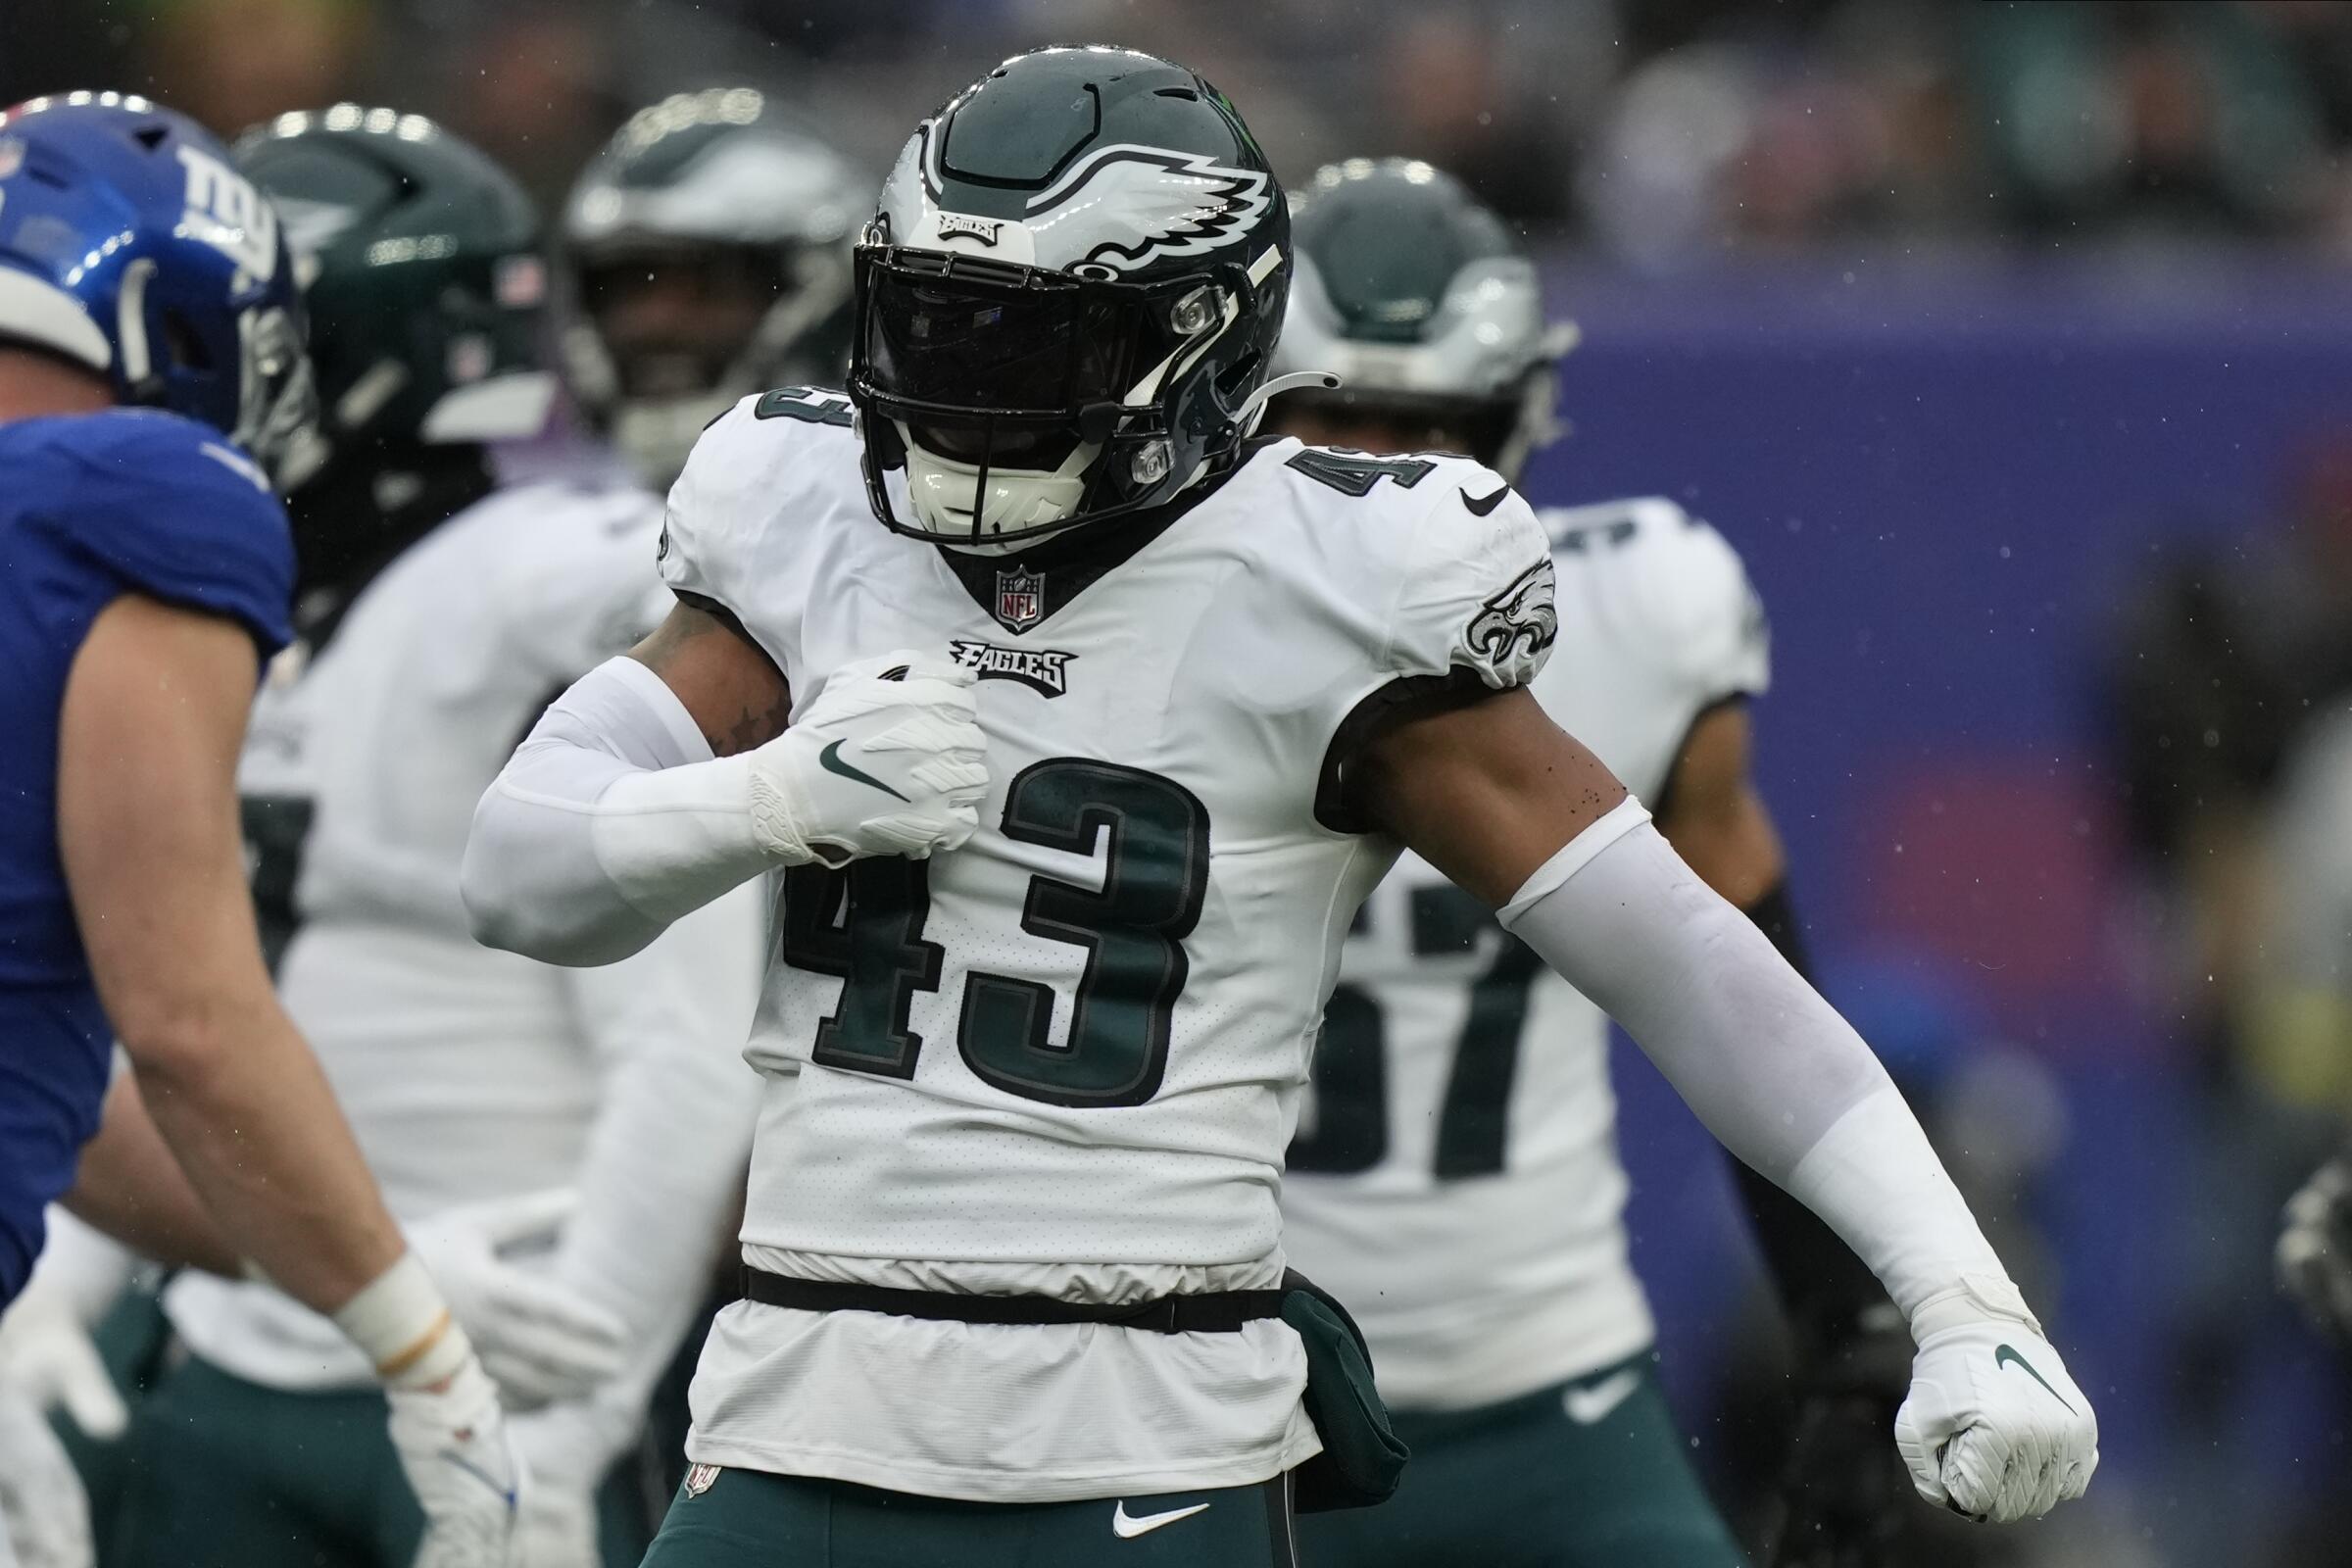 There's one big reason to think the Eagles will be terrific in